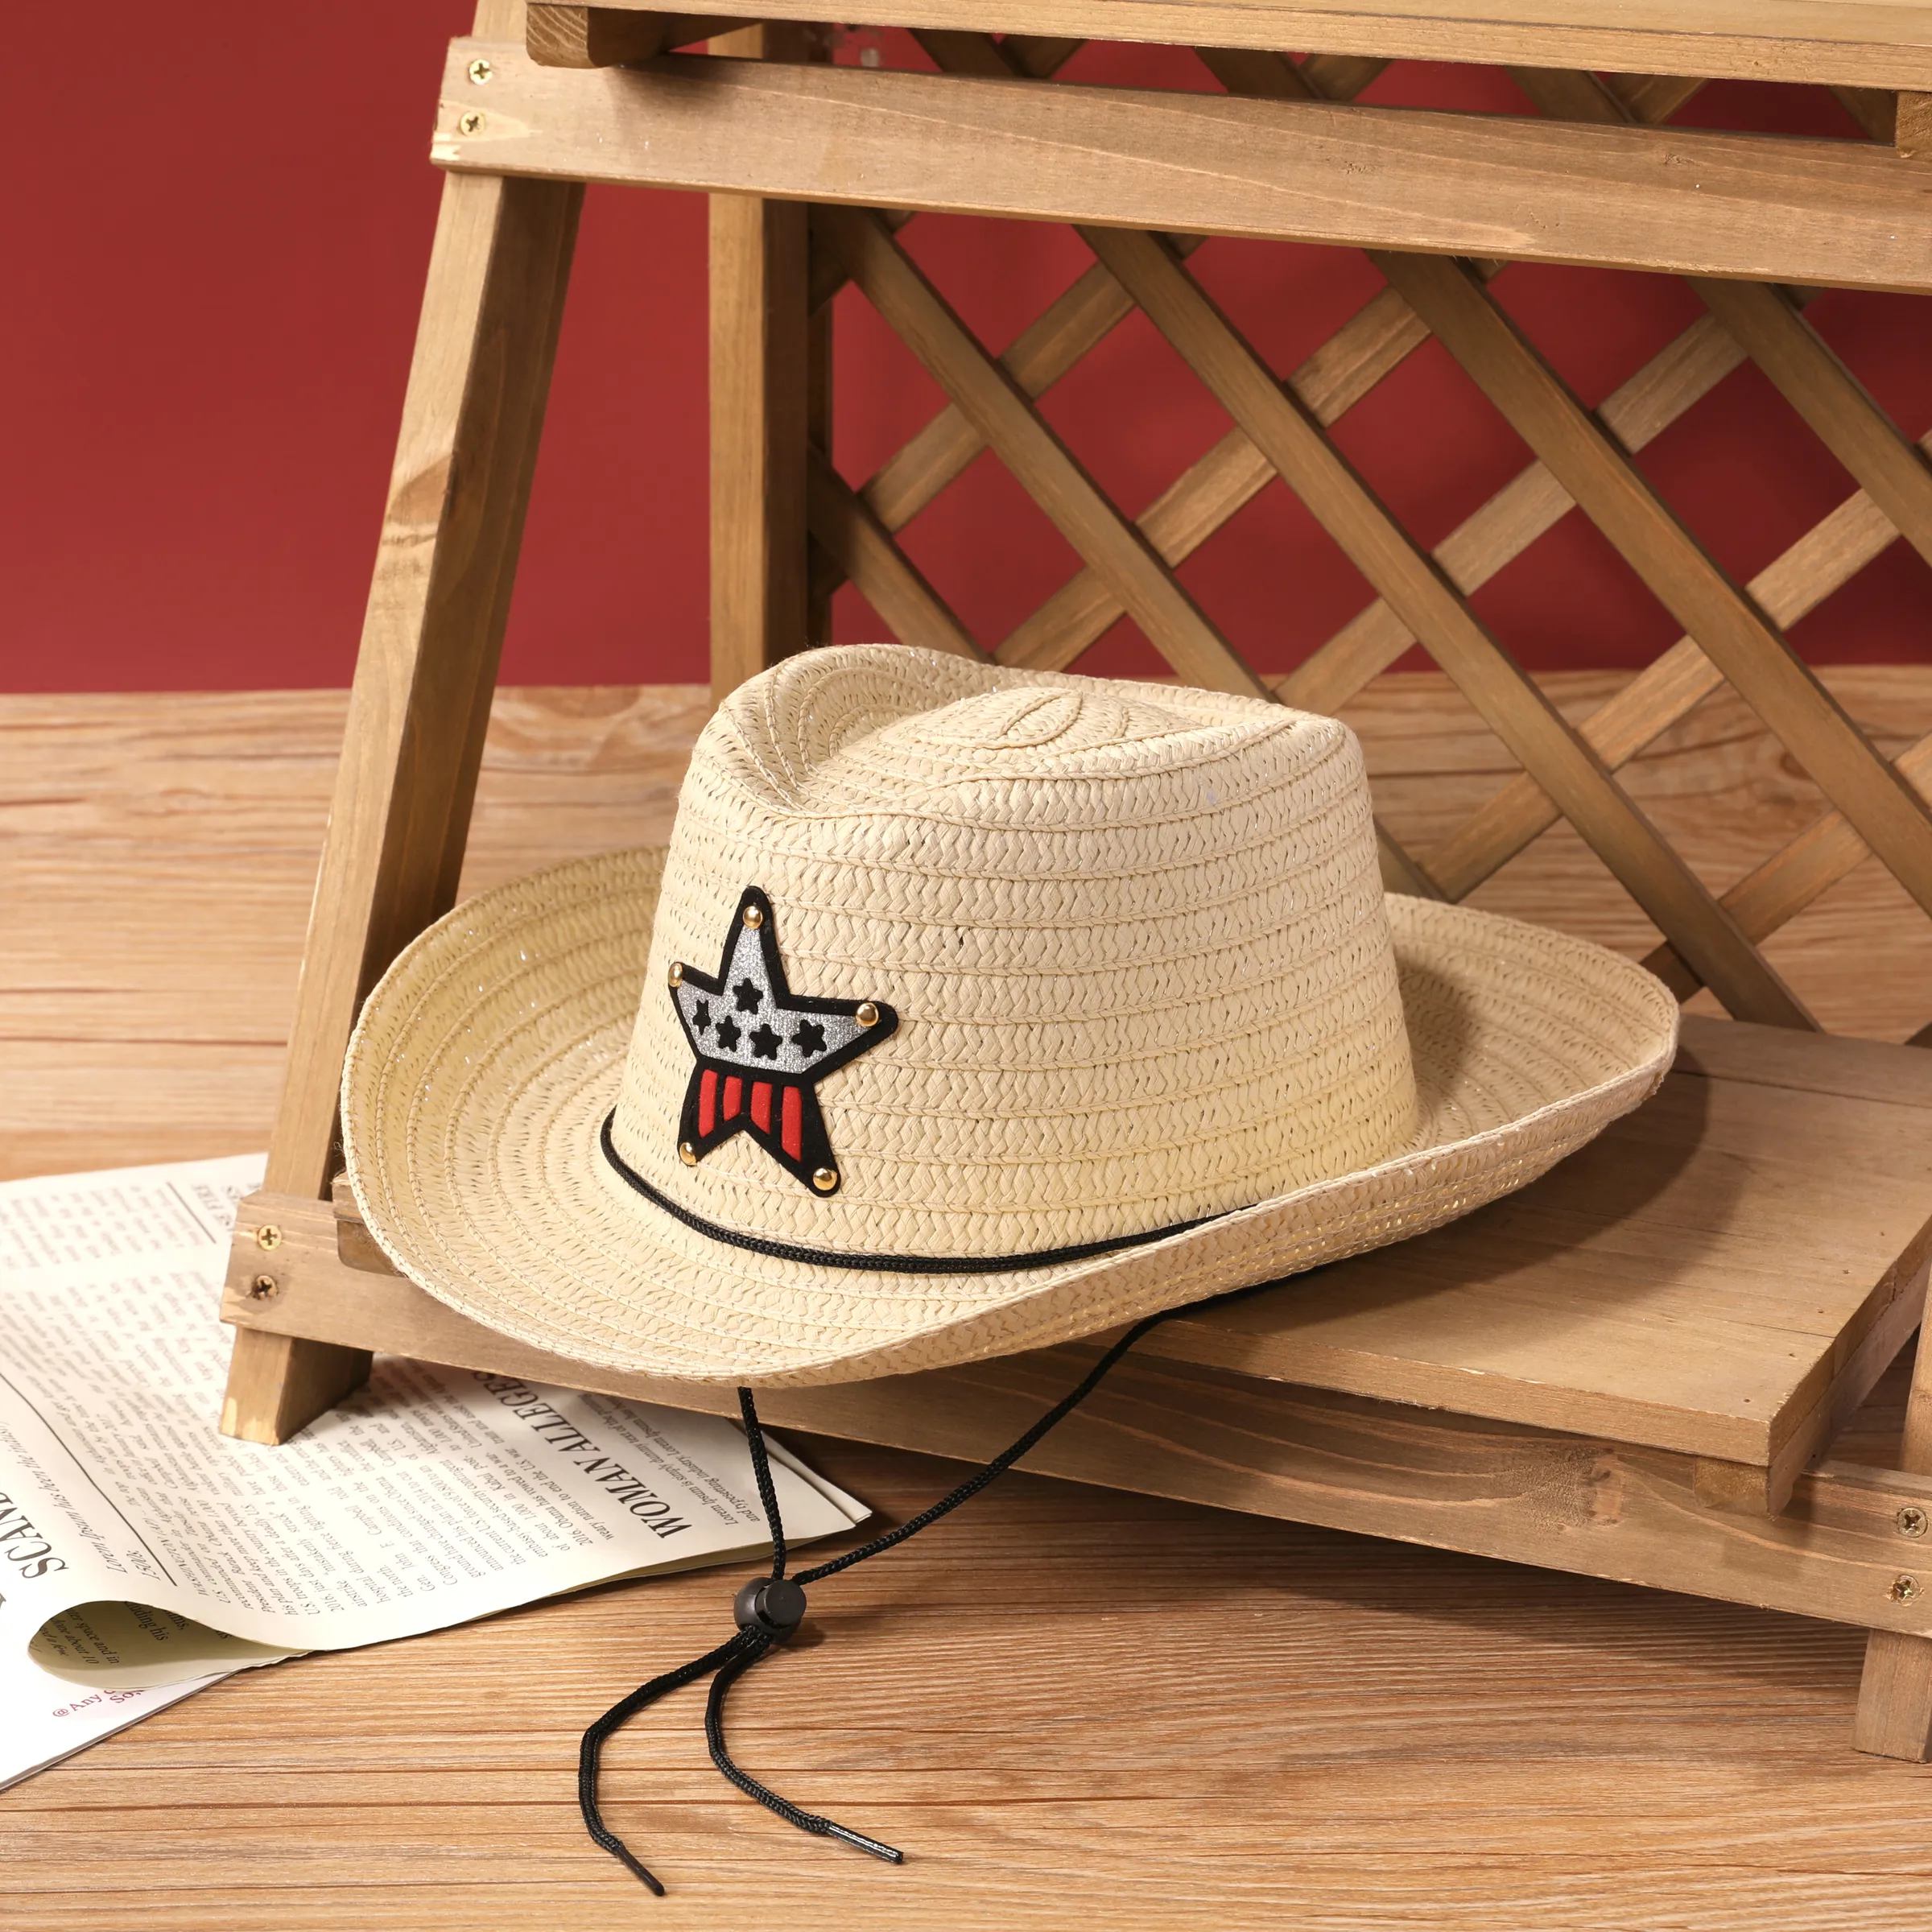 Western Cowboy Children's Sun Hat for Girls and Boys with Straw Weave, Five-Pointed Star Accent